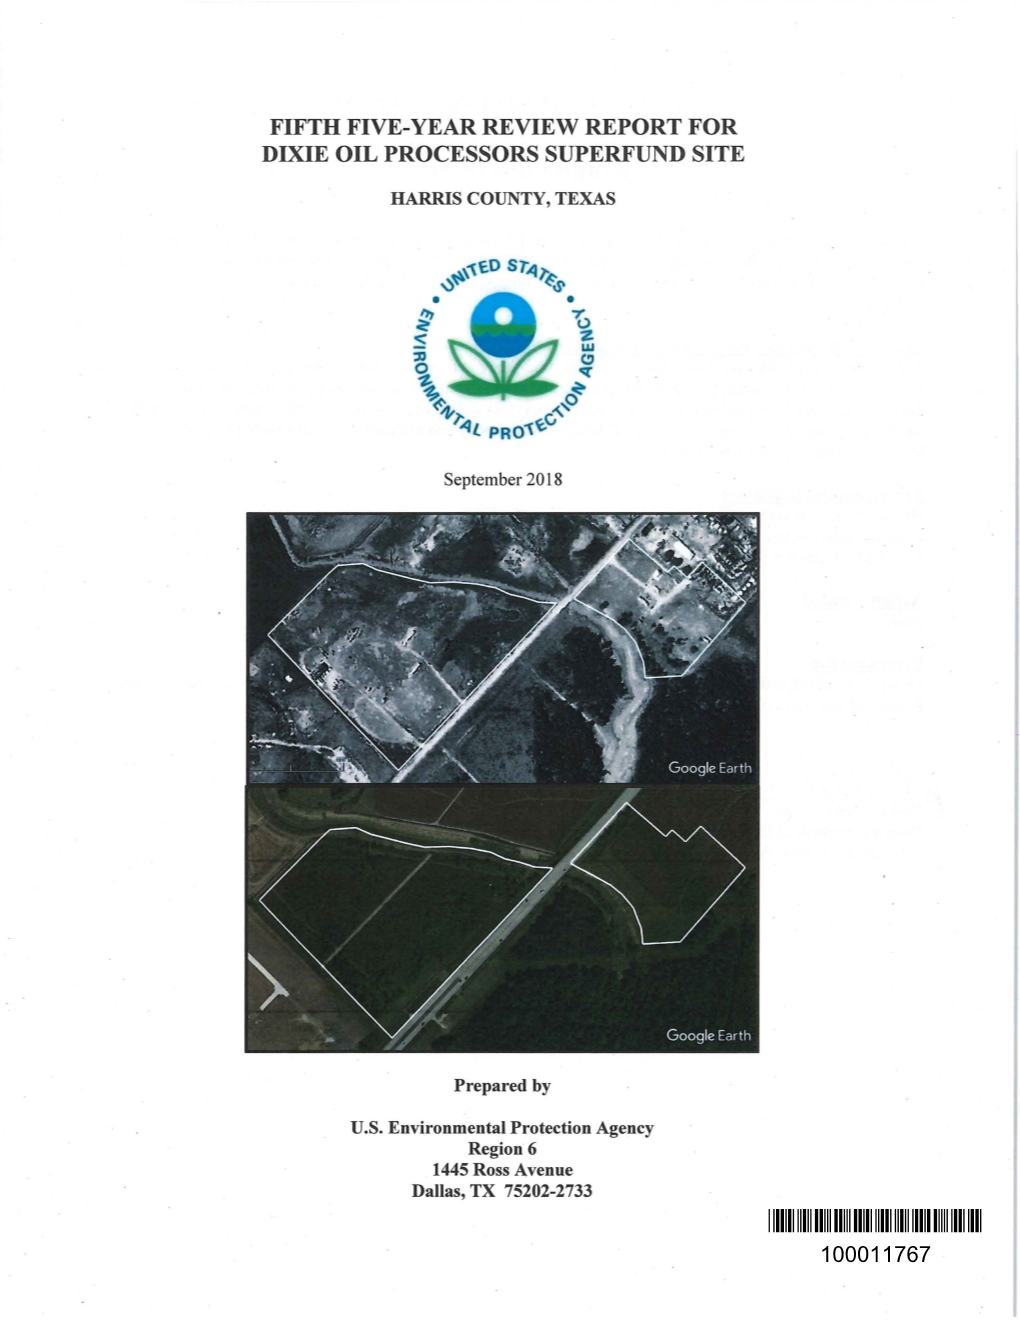 Fifth Five-Year Review Report for Dixie Oil Processors Superfund Site